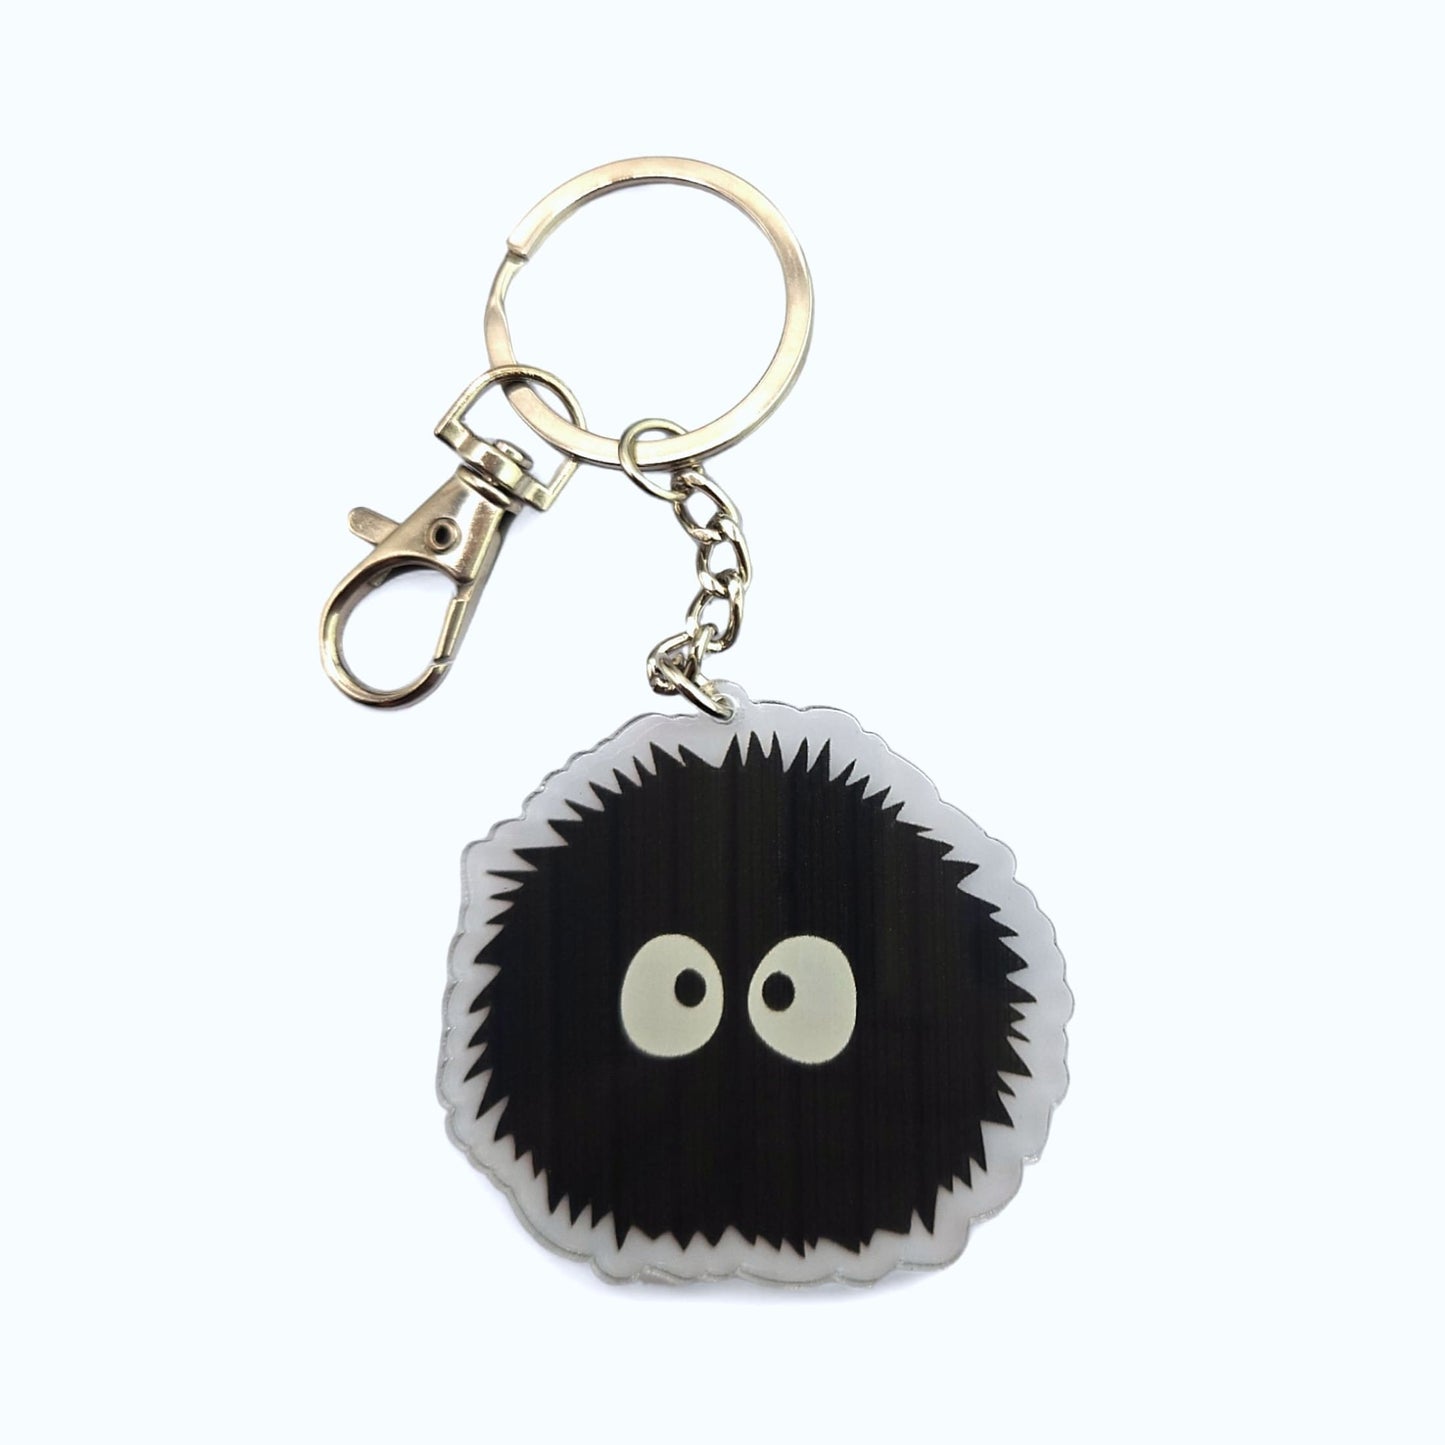 Soot Sprite Acrylic Keychain from Confetti Kitty, Only 8